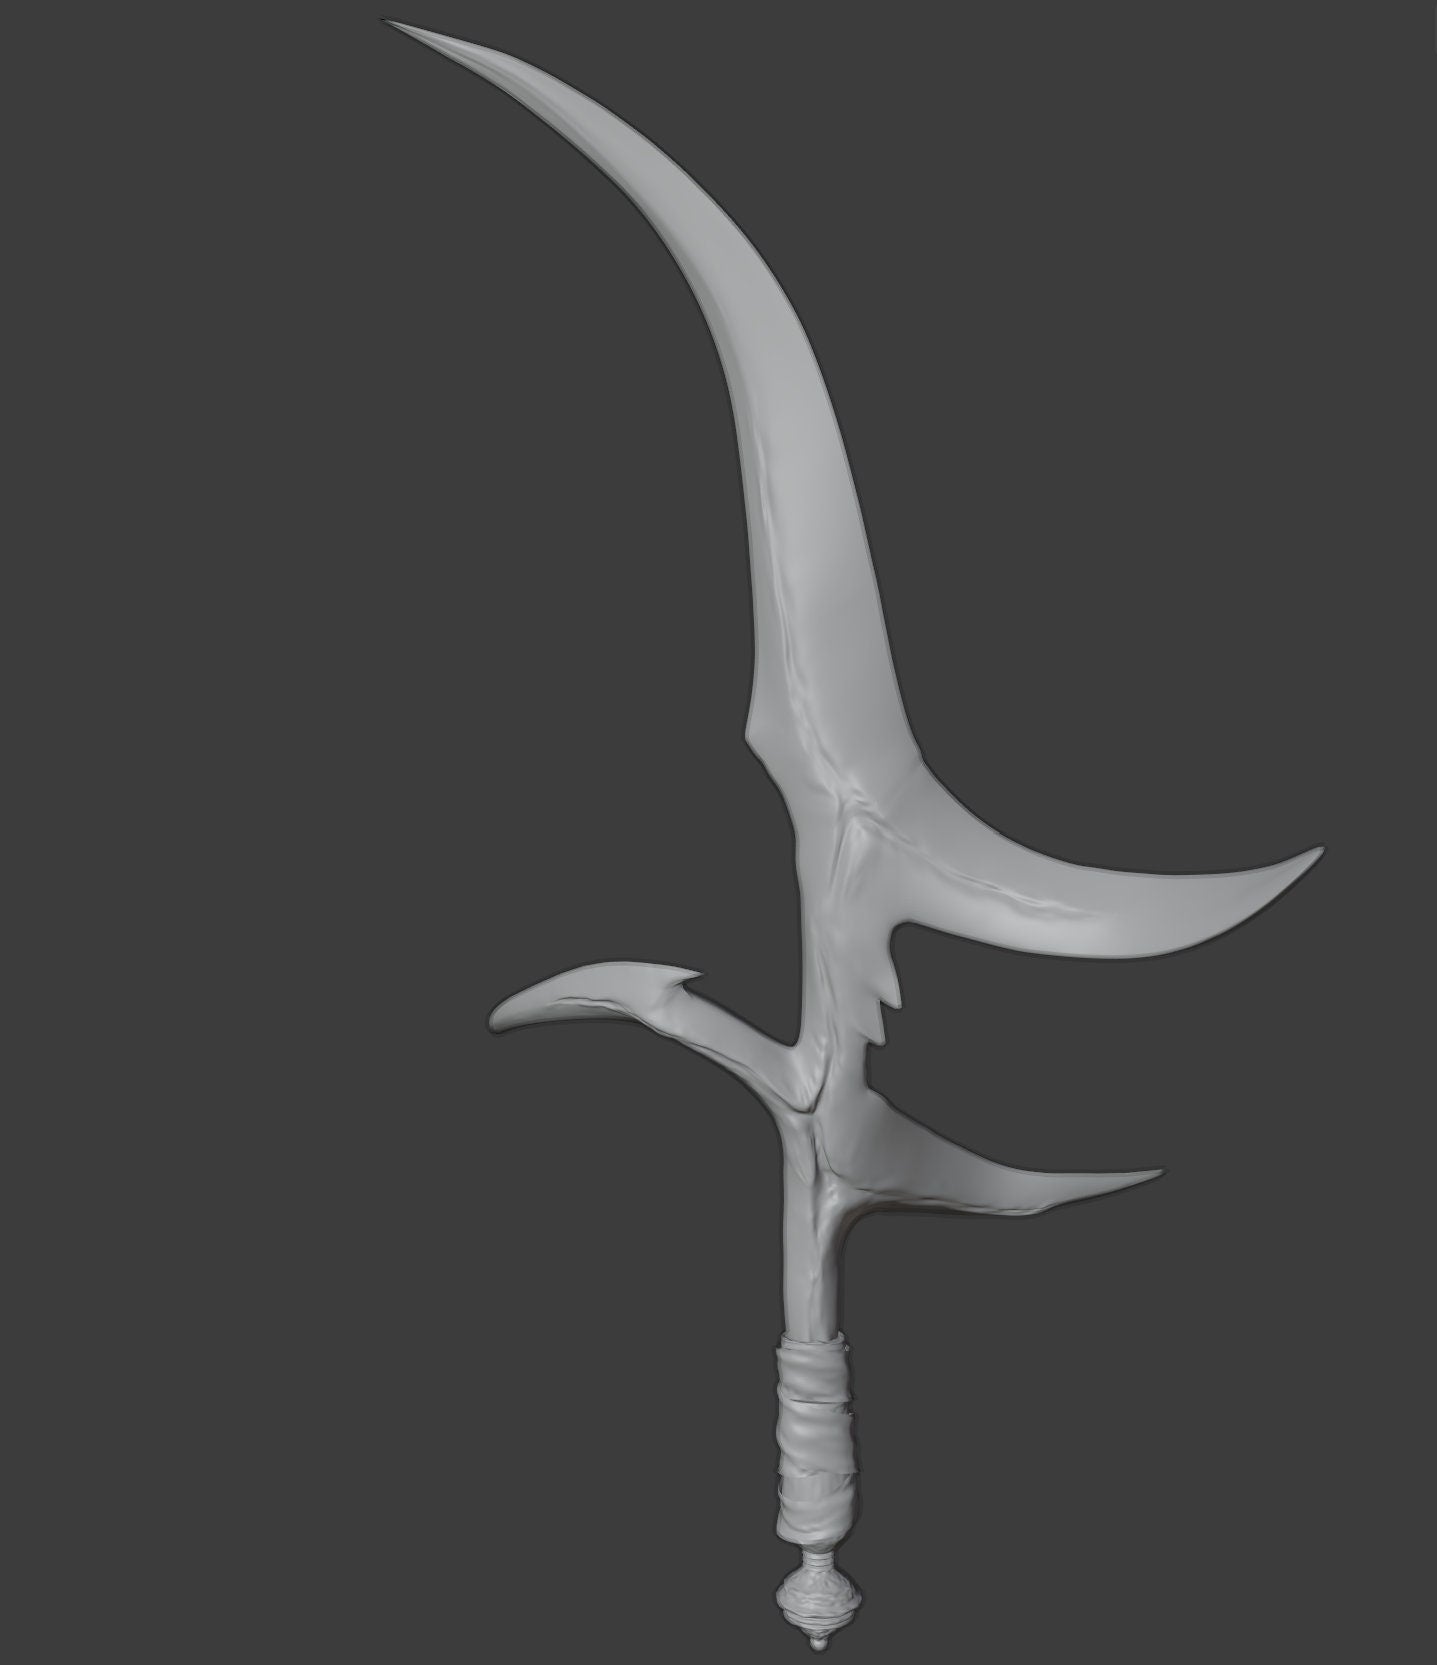 Black Knife - Digital 3D Model Files and Physical 3D Printed Kit Options